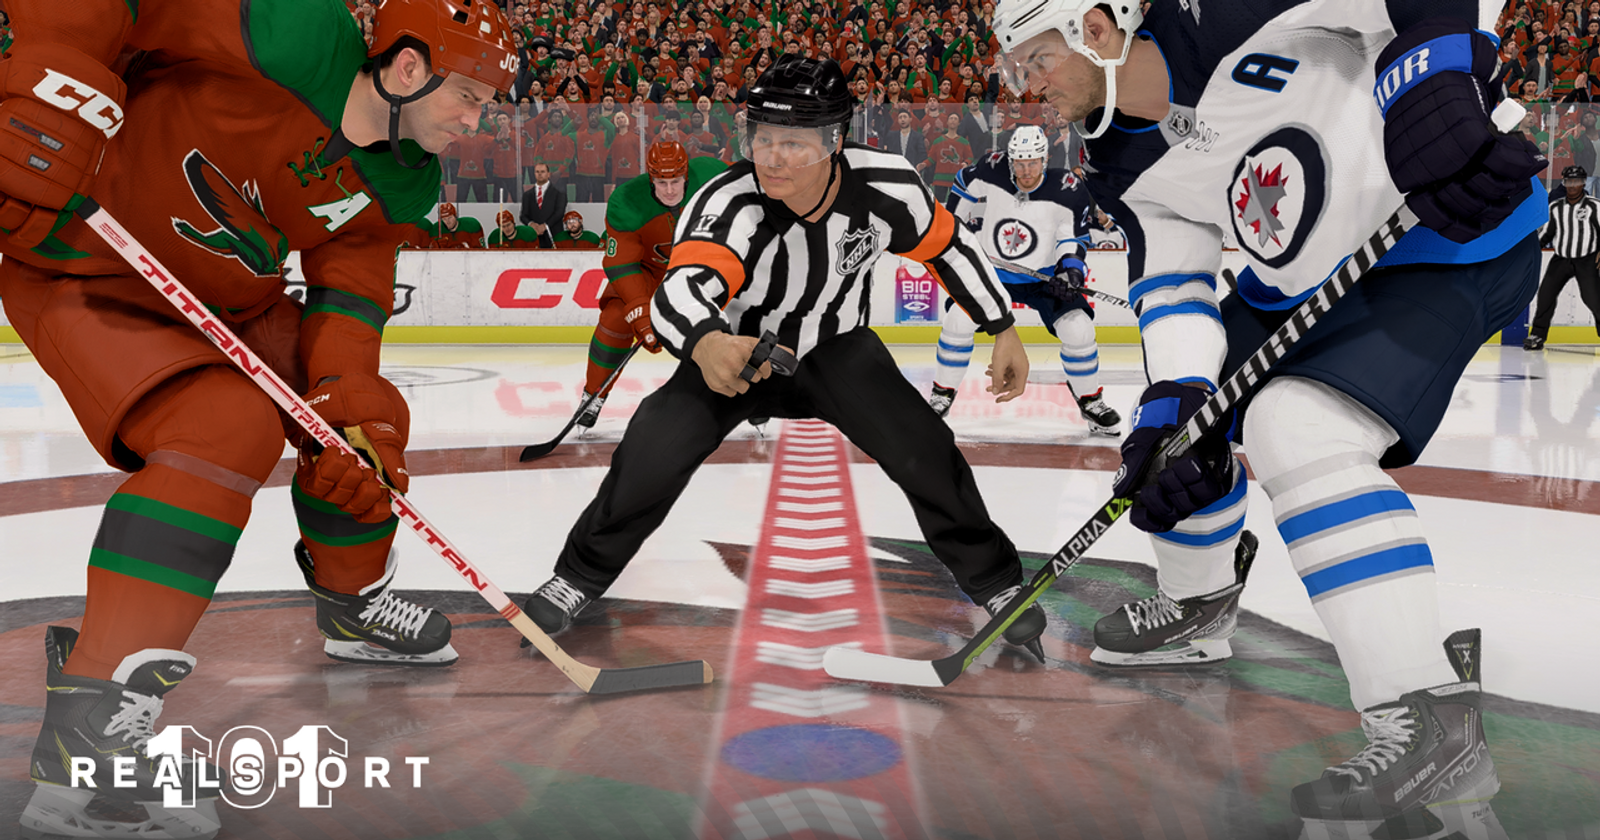 October EA Play Sports Game rewards announced